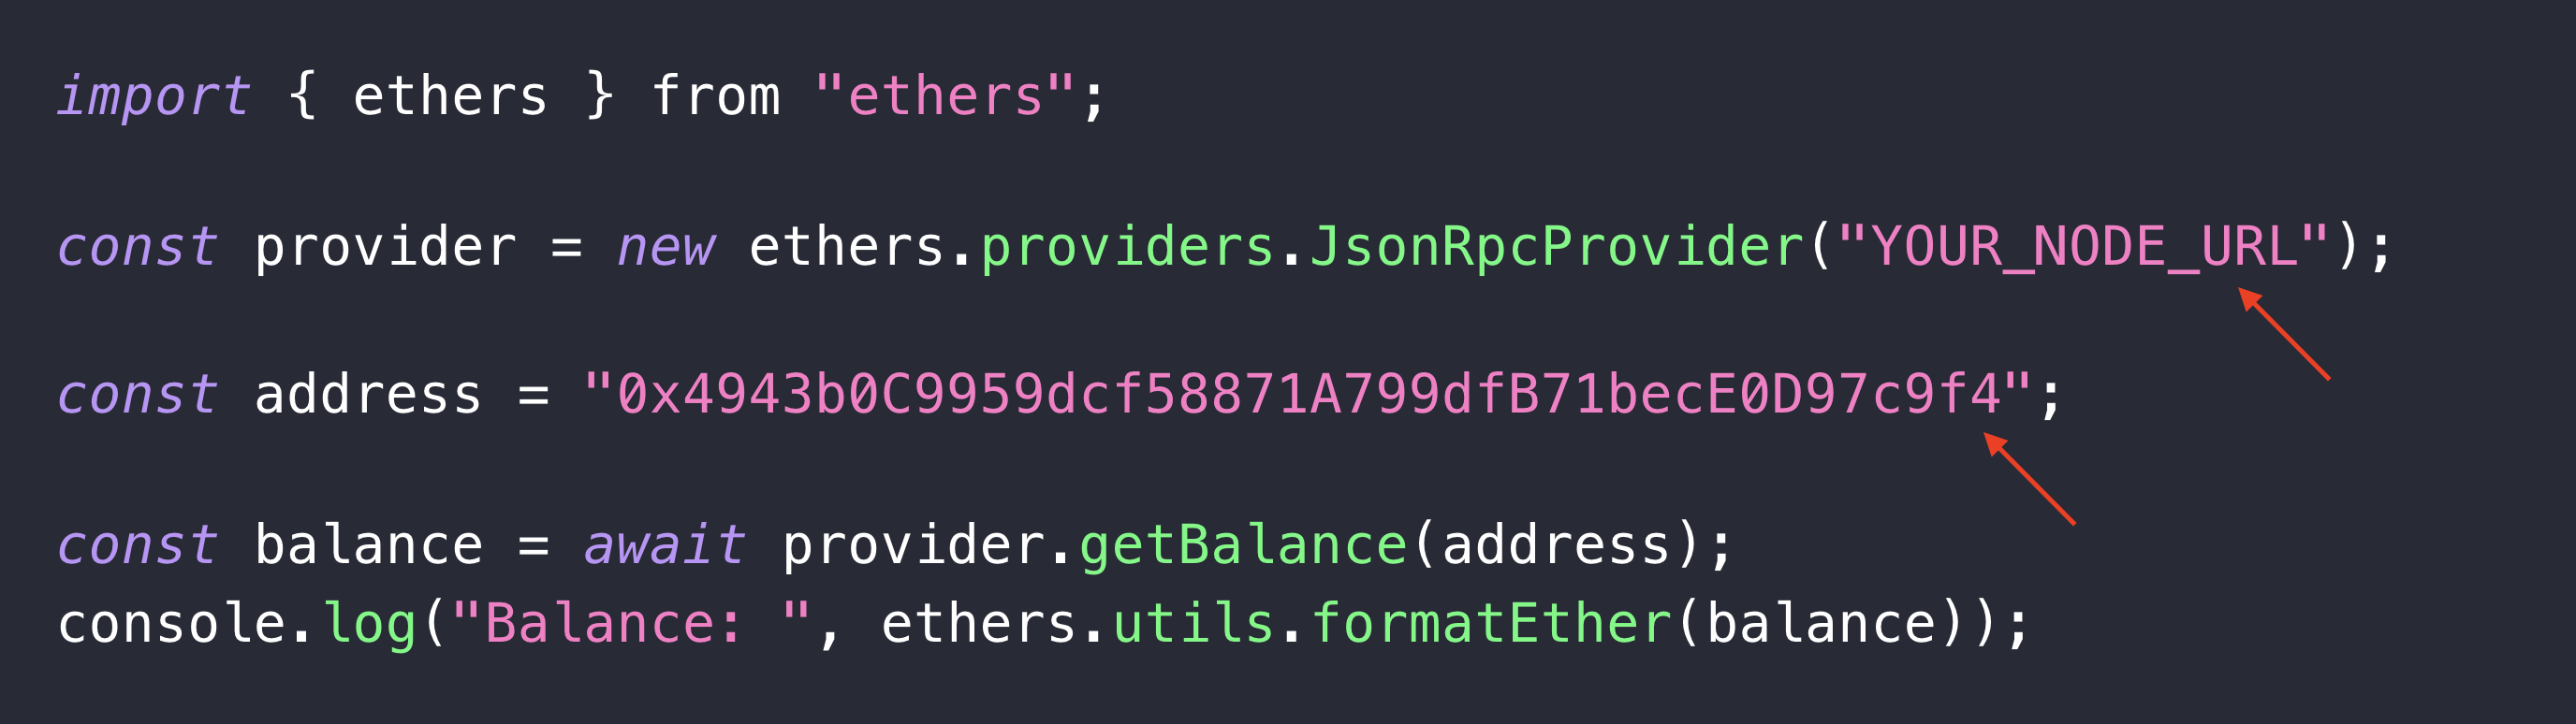 Red arrows pointing at YOUR_NODE_URL and address parameters in a code editor. 